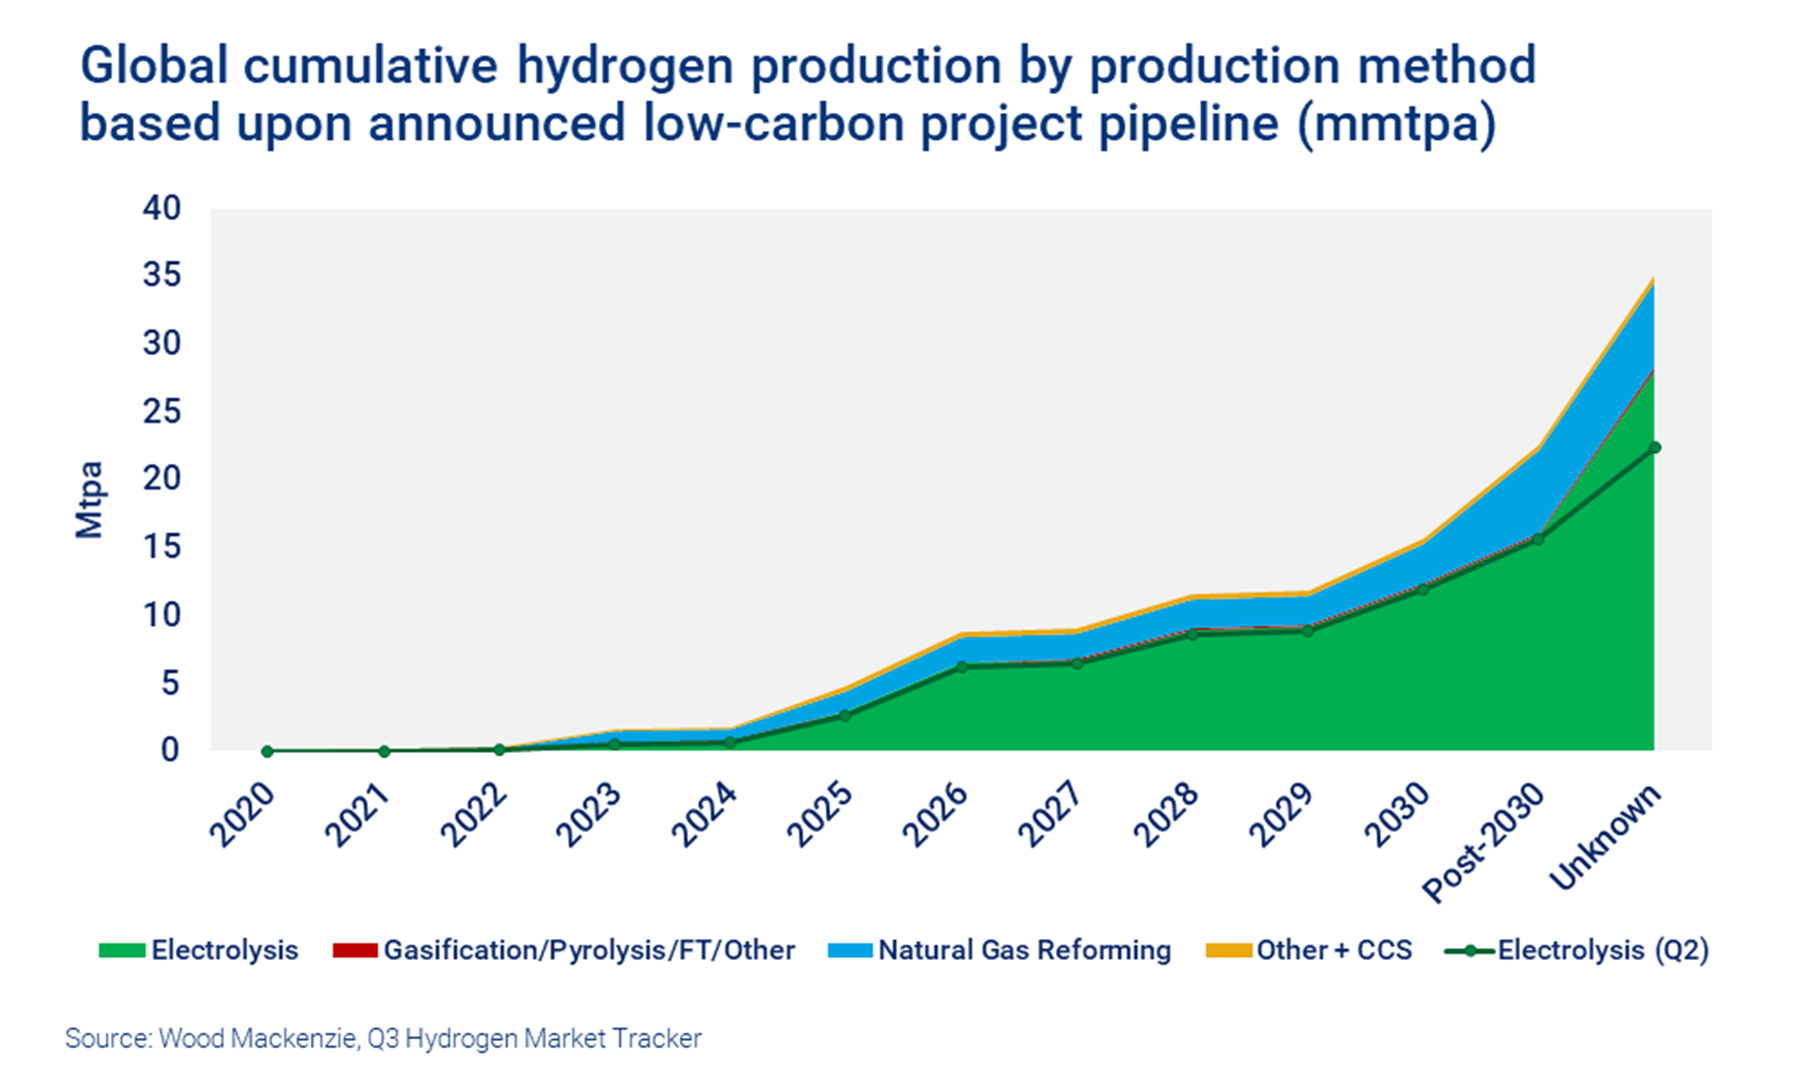 Chart shows global cumulative hydrogen production by production method 